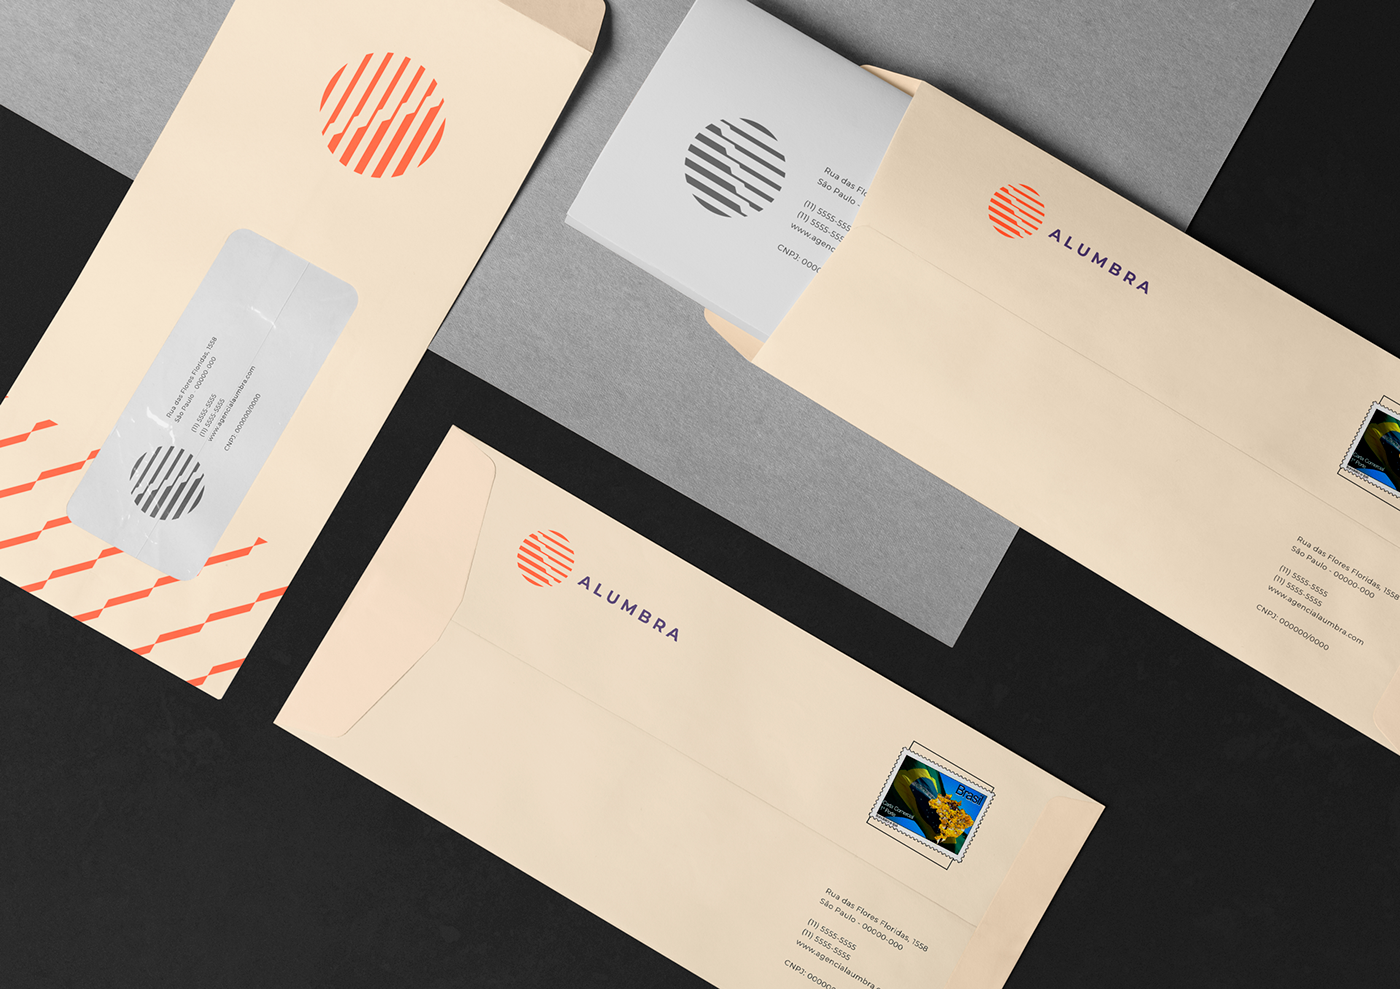 brand logo Manual da Marca manual identidade visual pattern student show student case academic project awarded case